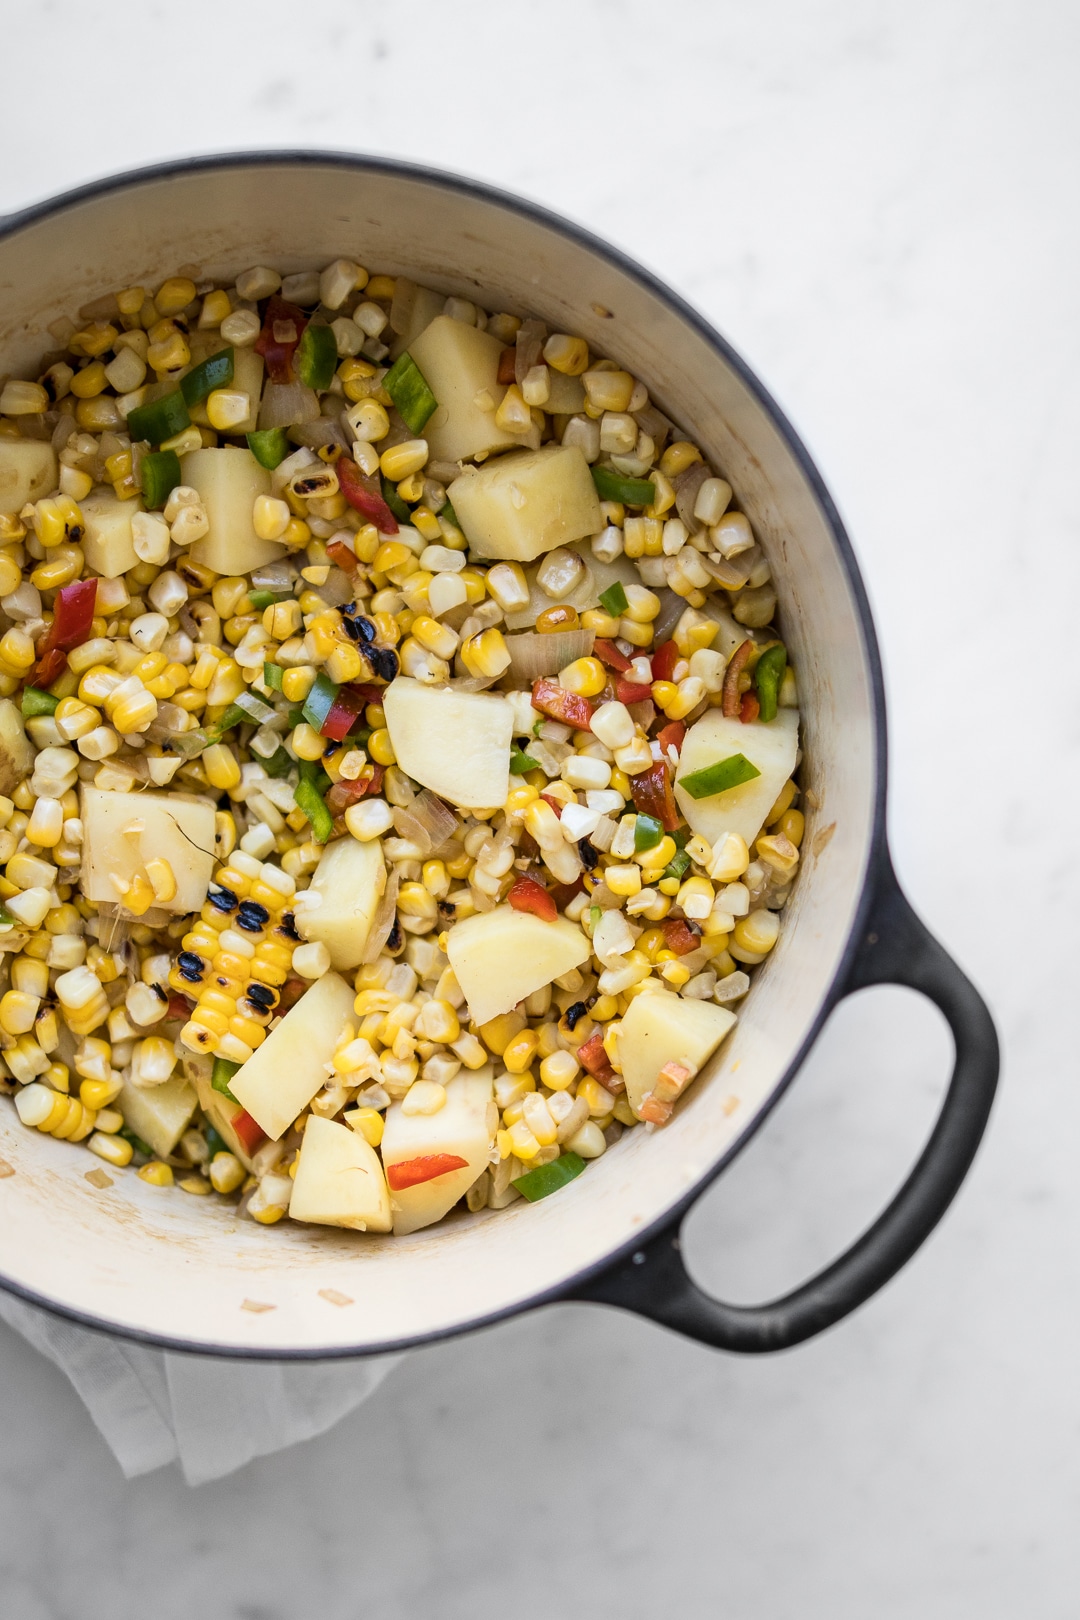 Corn, potatoes, and vegetables cooking in a dutch oven